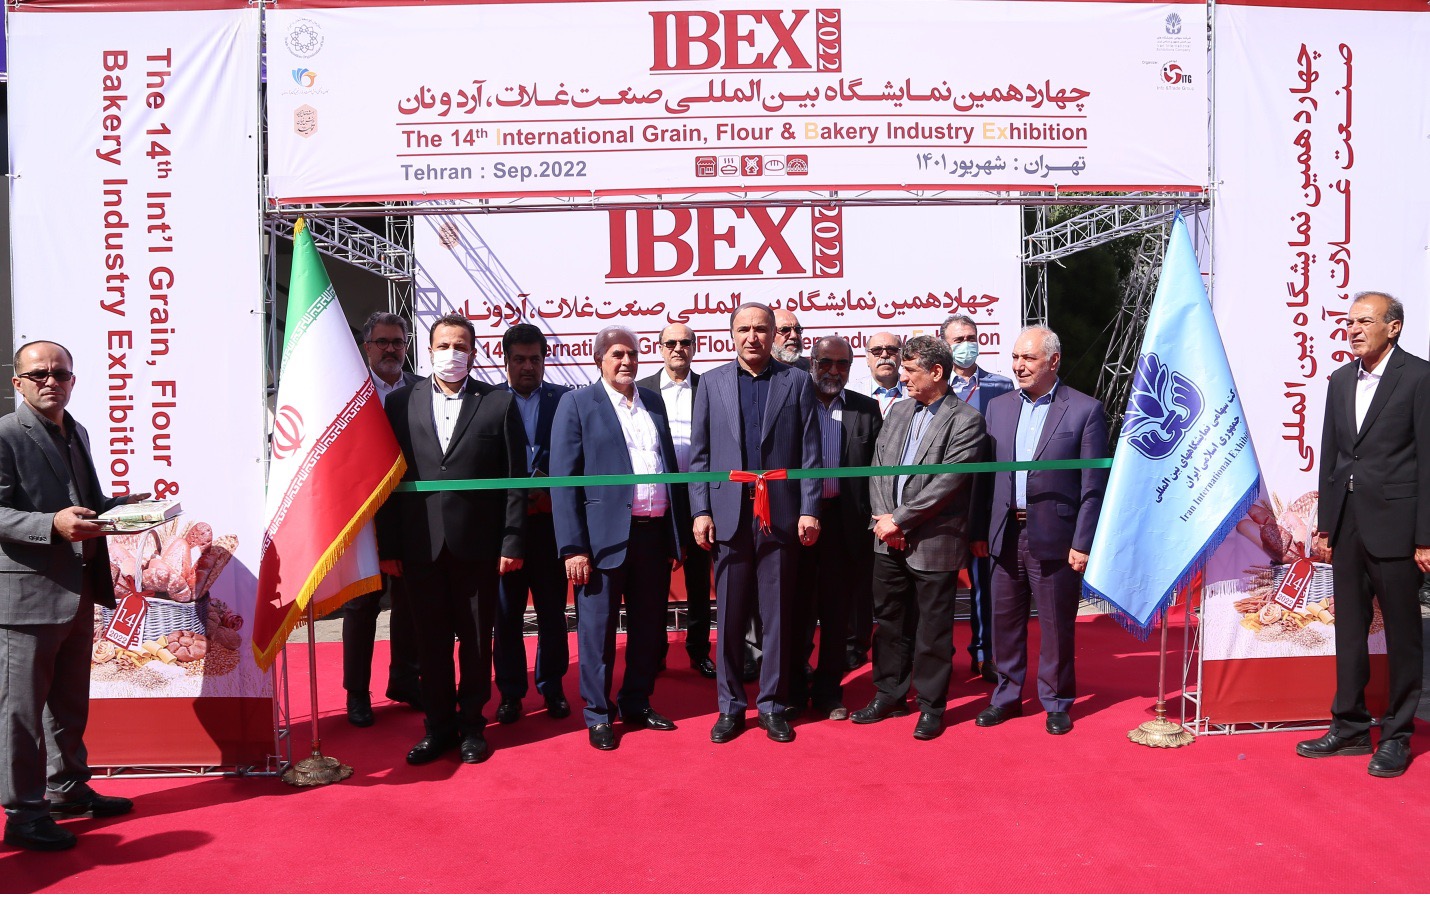 The 14th Int’l Grain, Flour and Bakery Industry Exhibition (IBEX 2022) has opened.